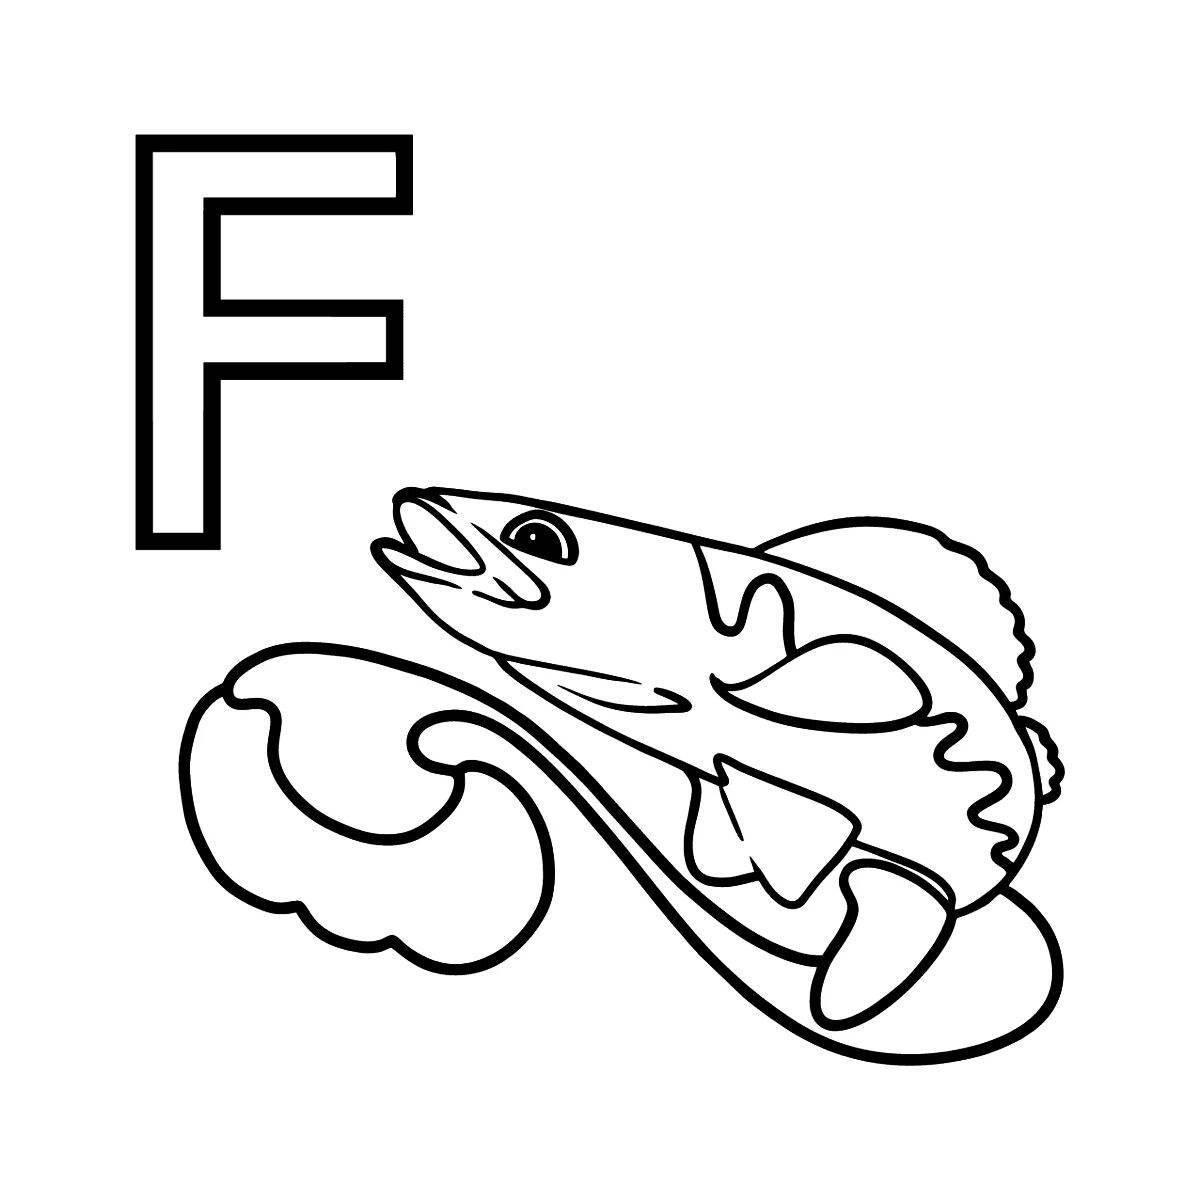 Coloring page funny english letter f